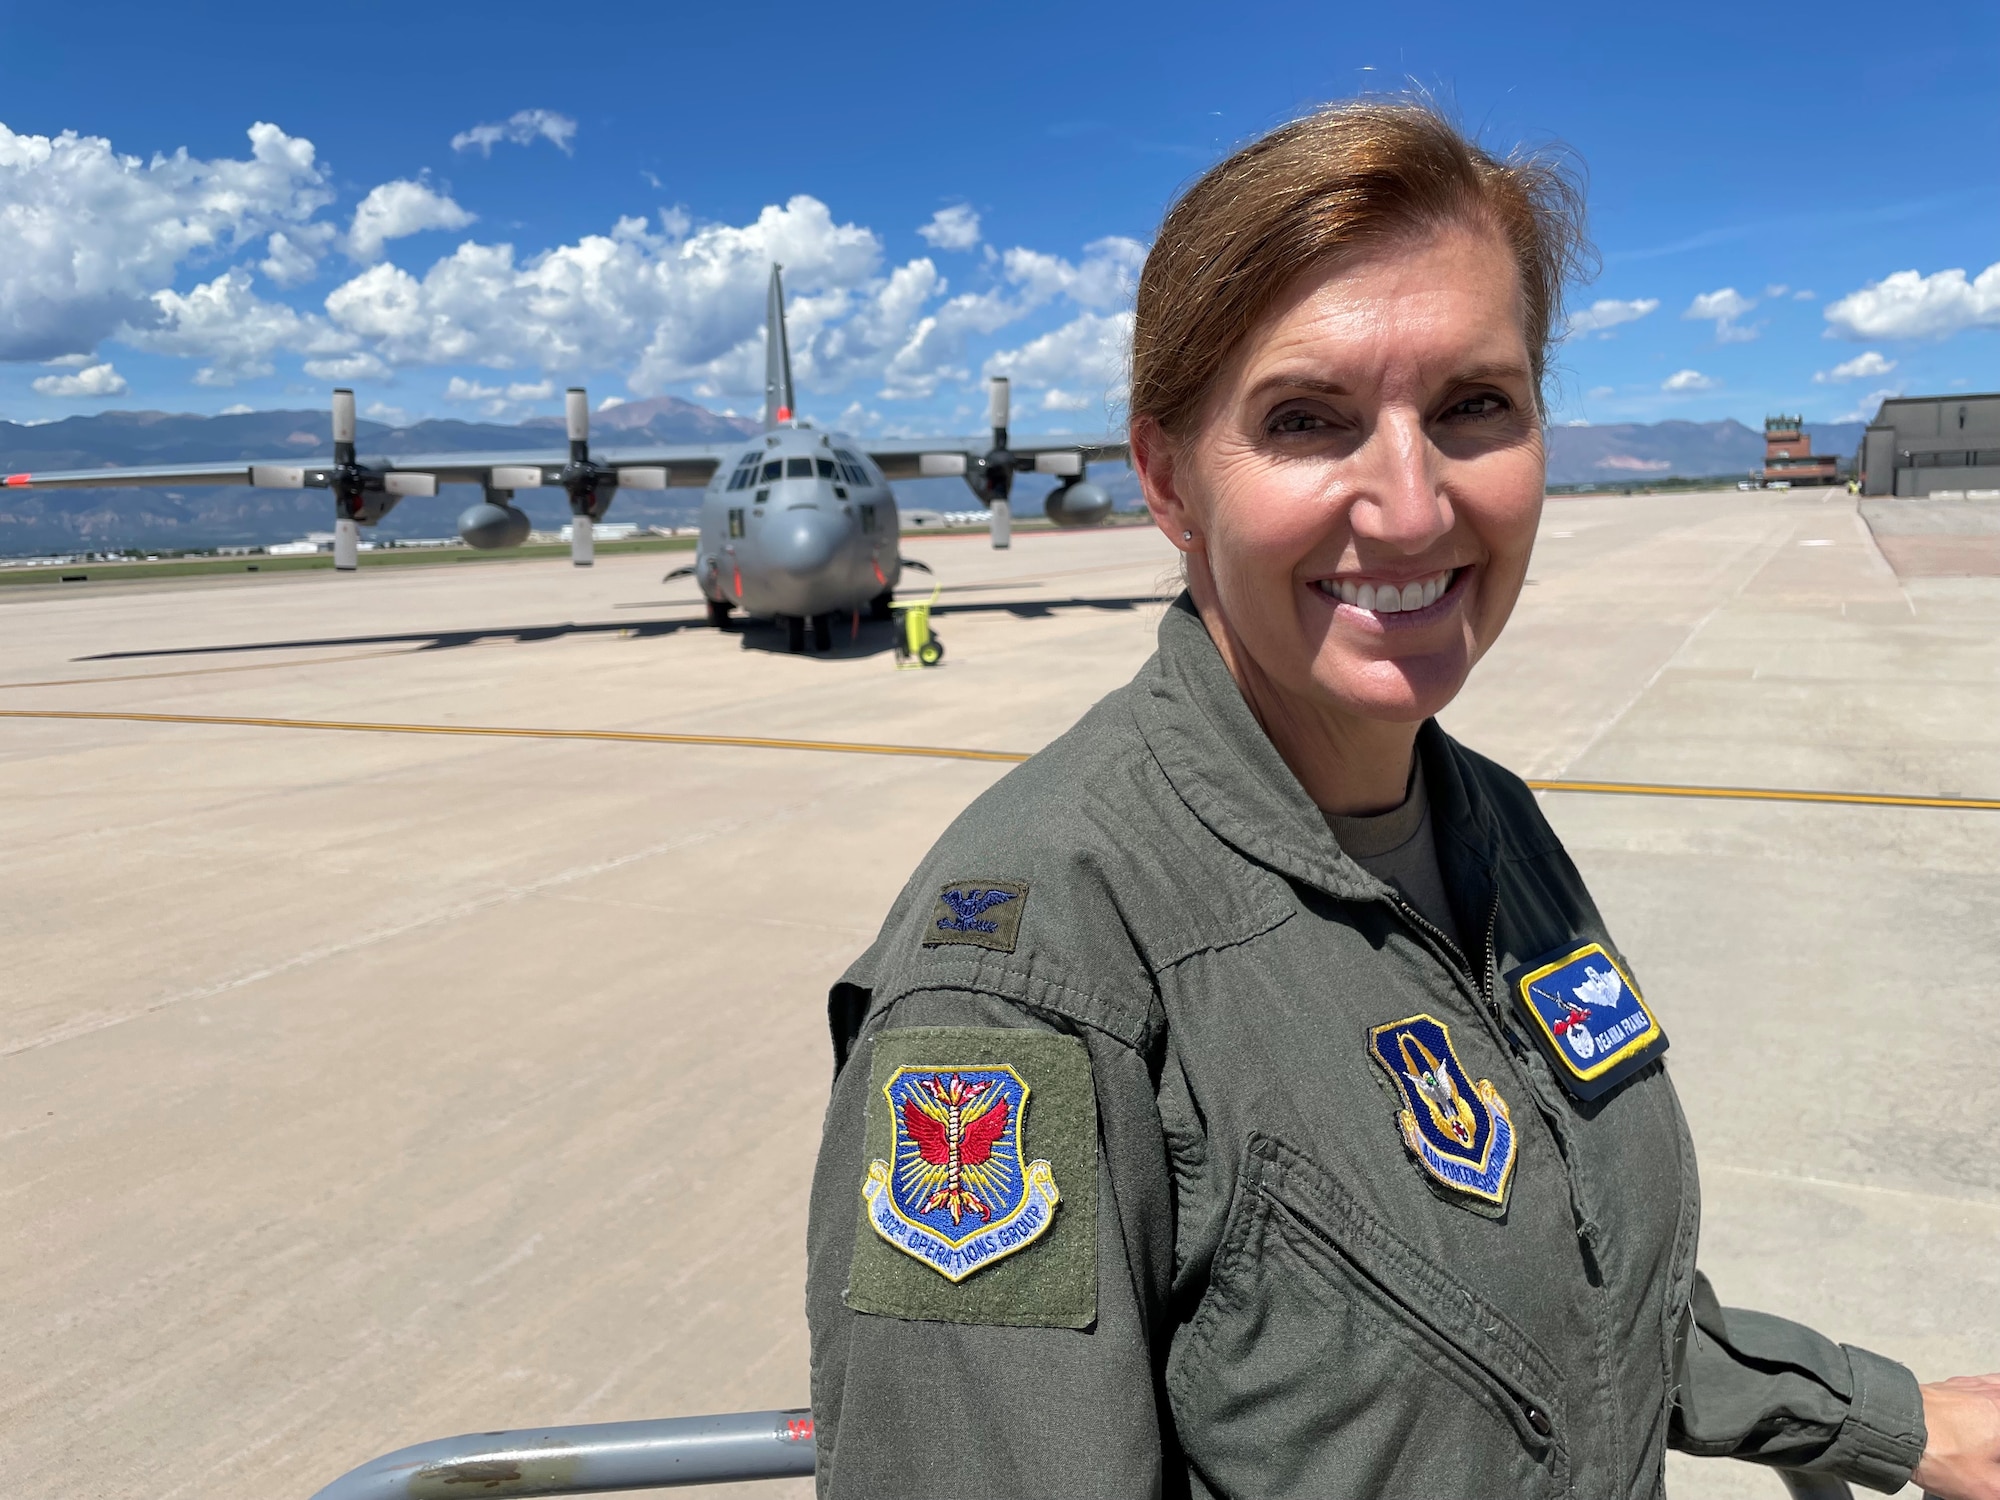 Female in military flying uniform stands in front of military plane on flightline